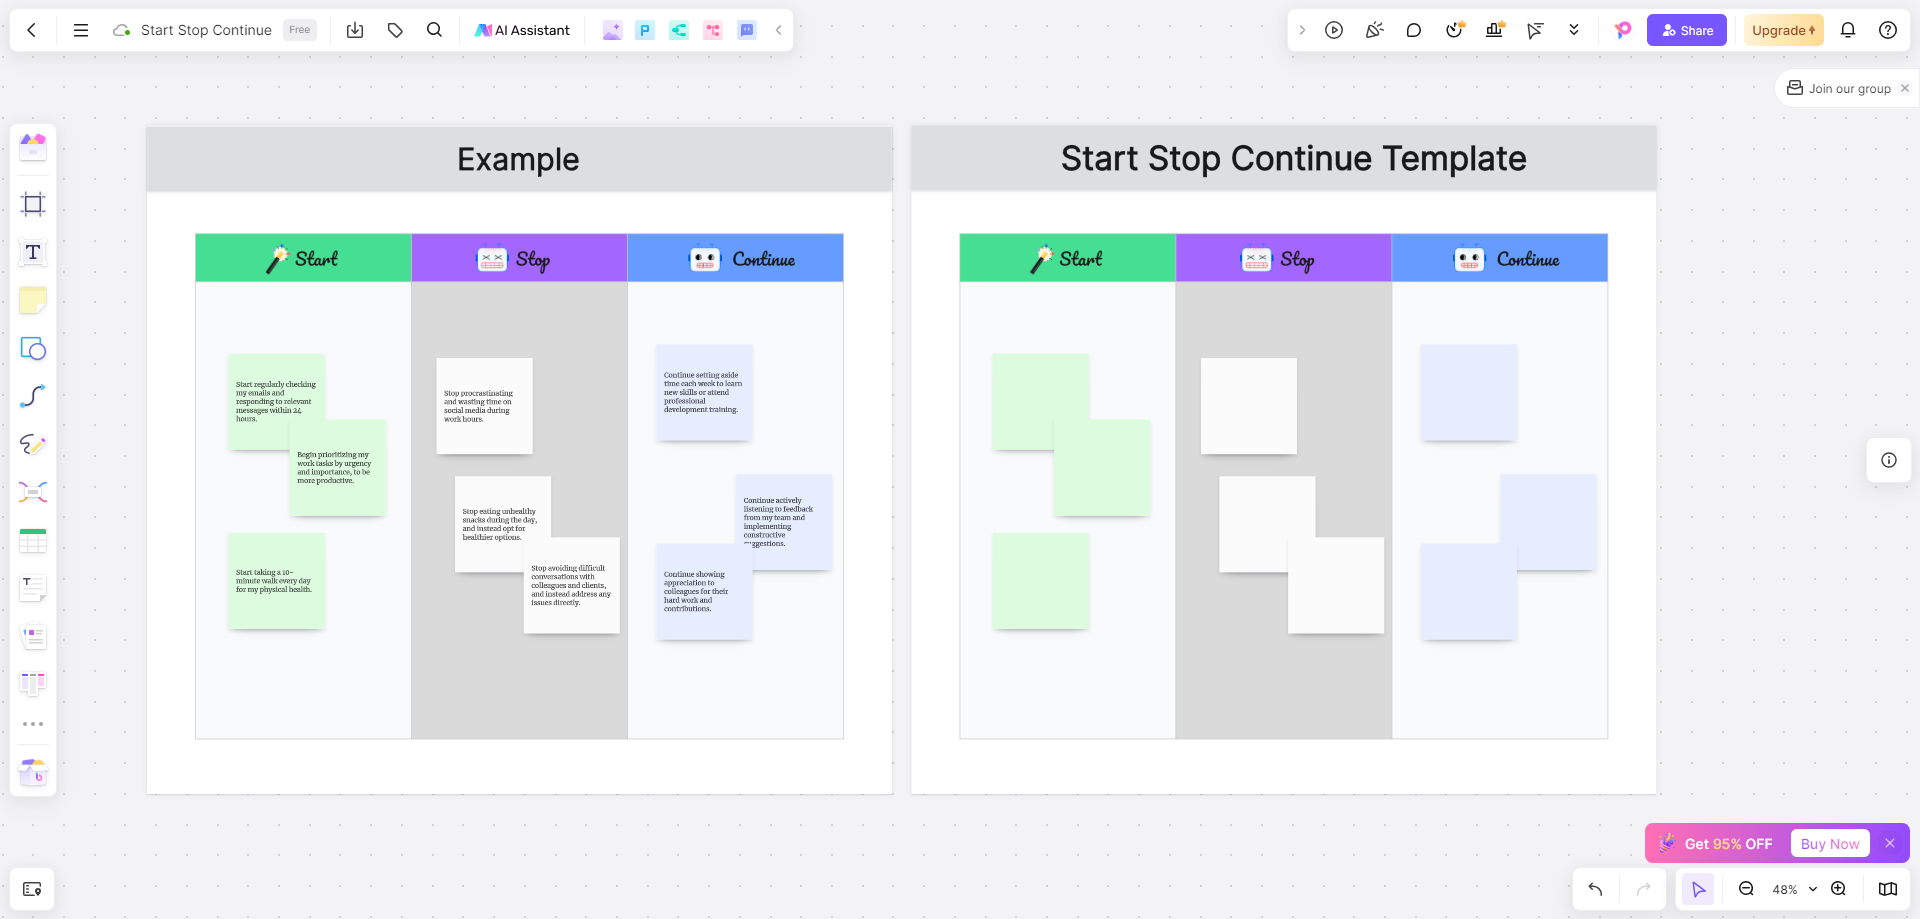 Start Stop Continue Templates: Provide and Review Feedback as a Manager